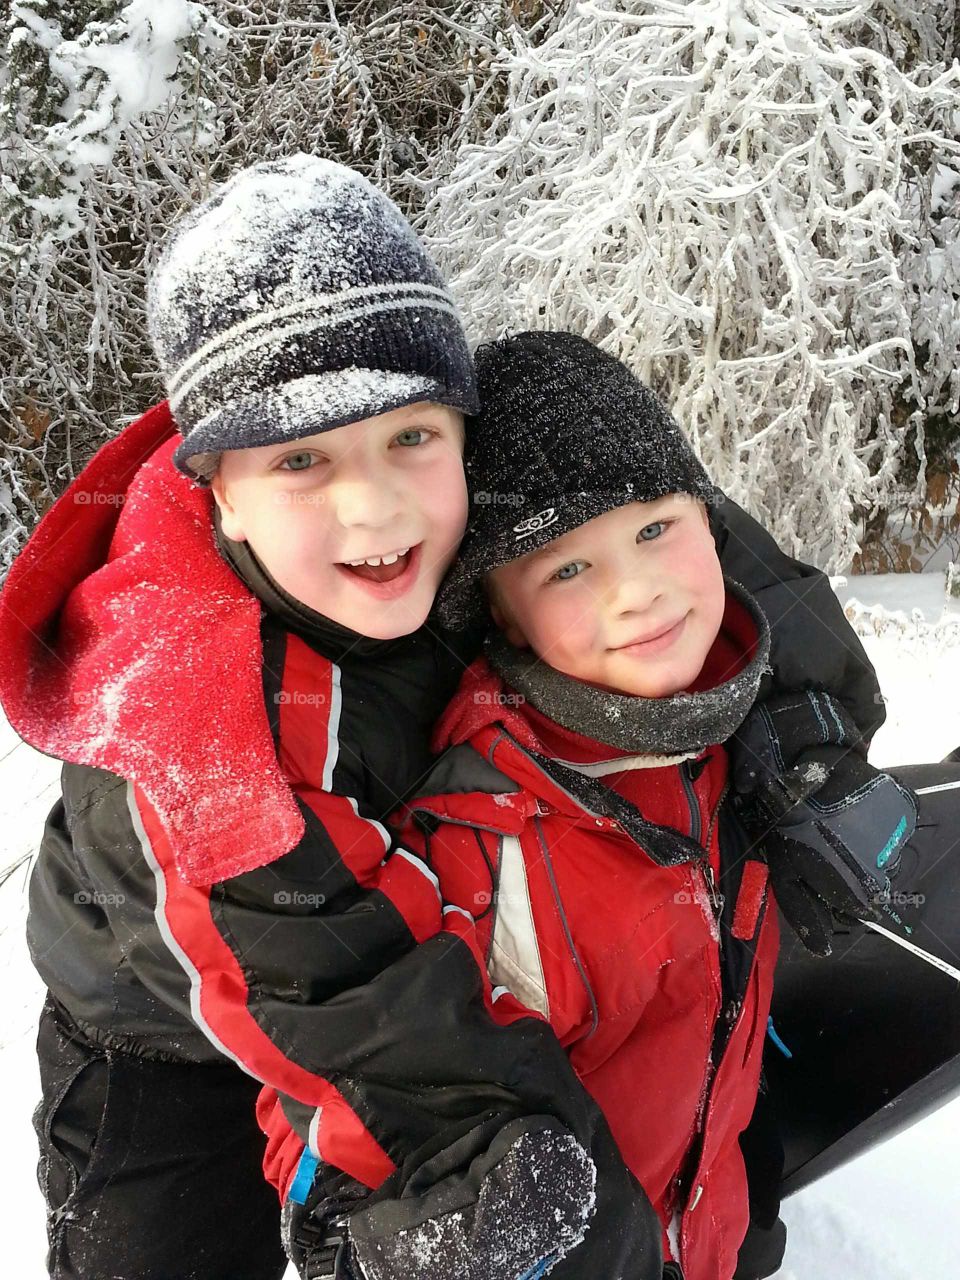 Two boys with their sleigh in winter with a background of trees covered with snow and ice